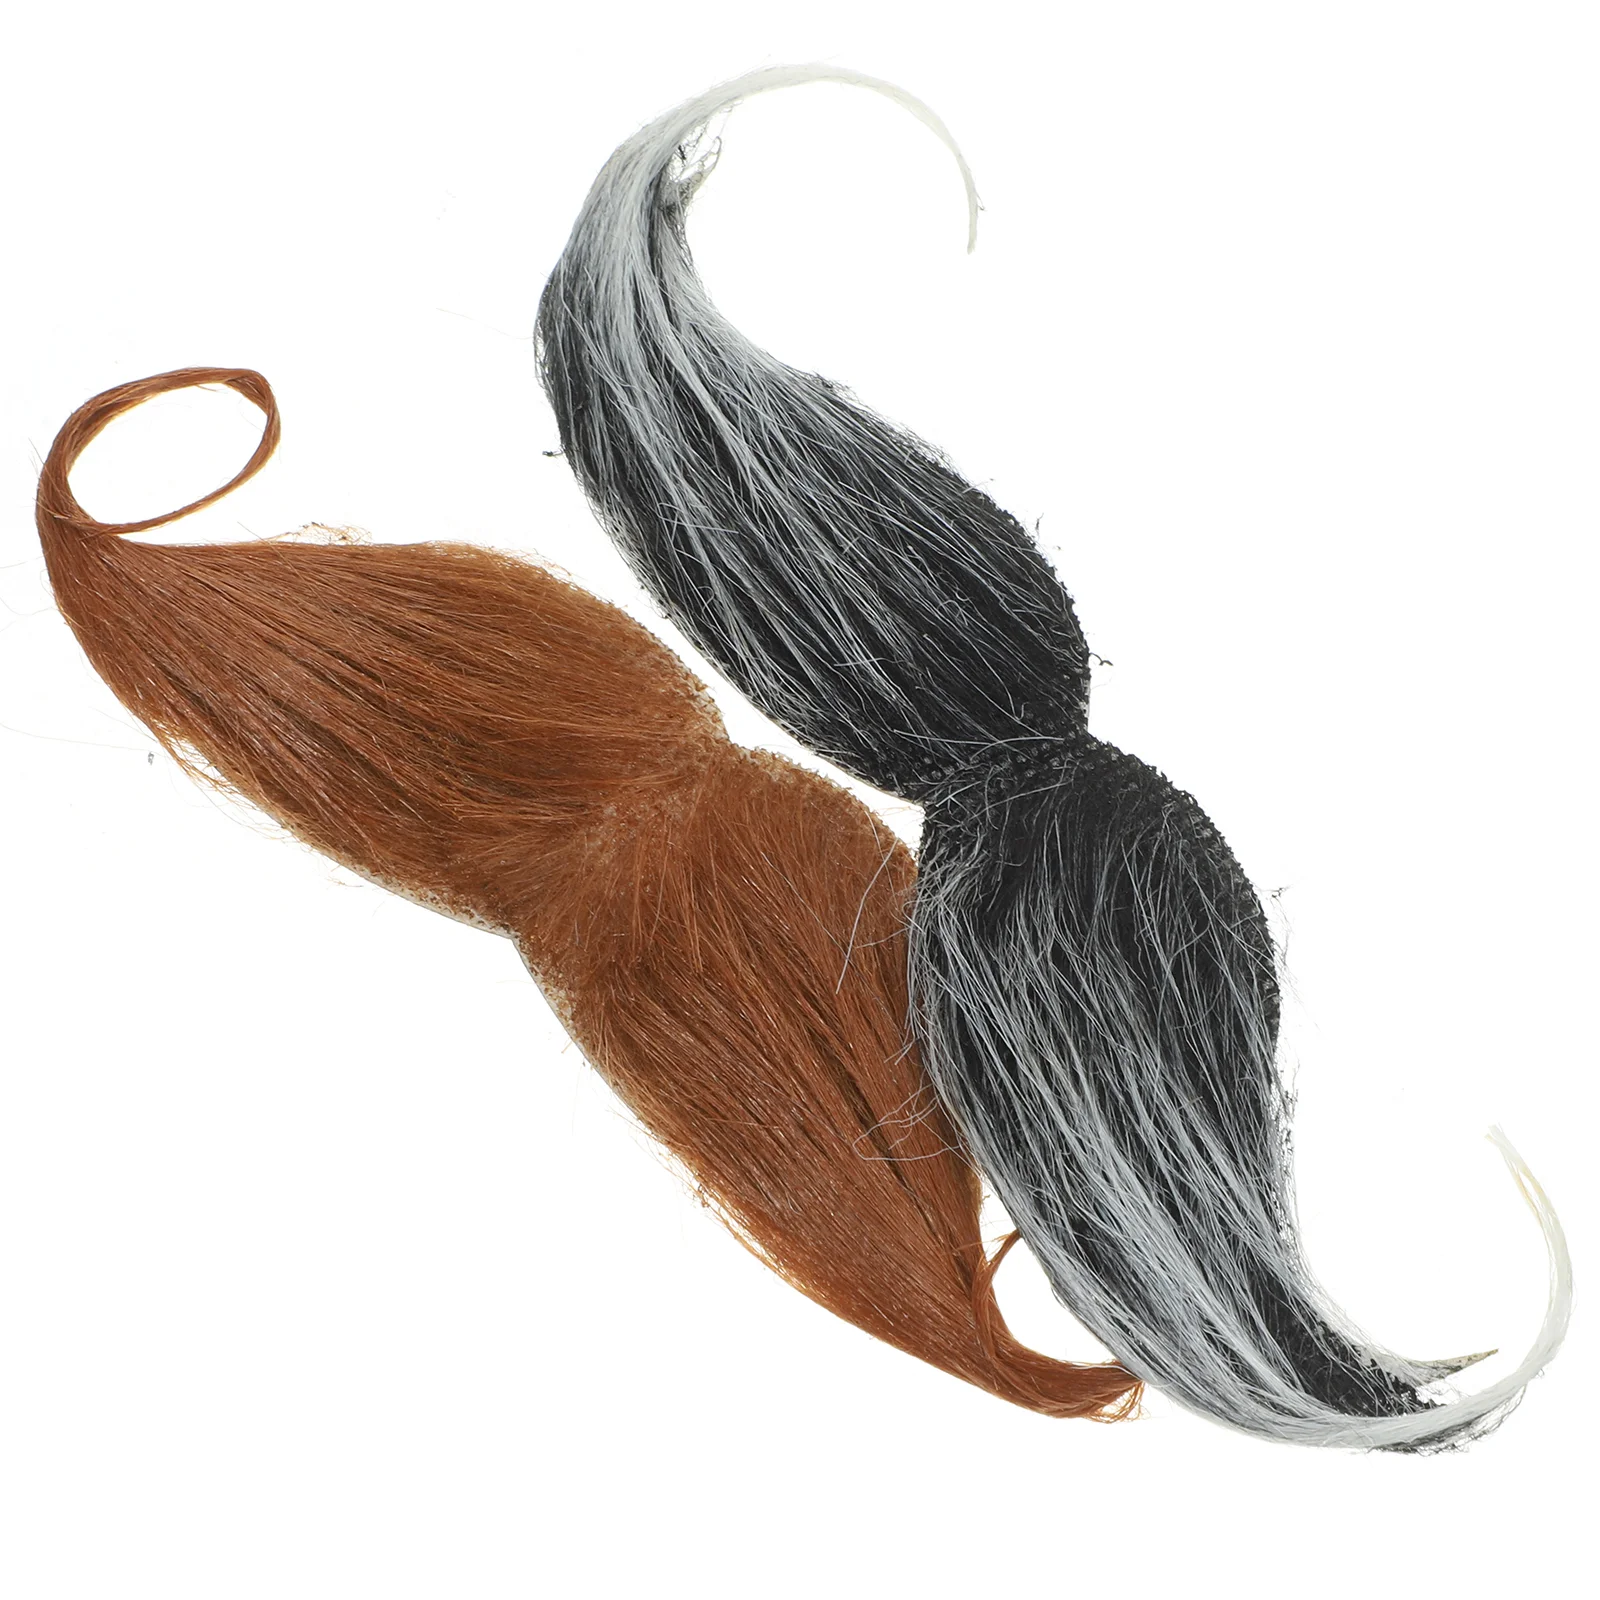 

2 Pcs Fake Beard Halloween Decor Performance Props Mustache Ornament Simulated Party Cloth Cosplay Decorations